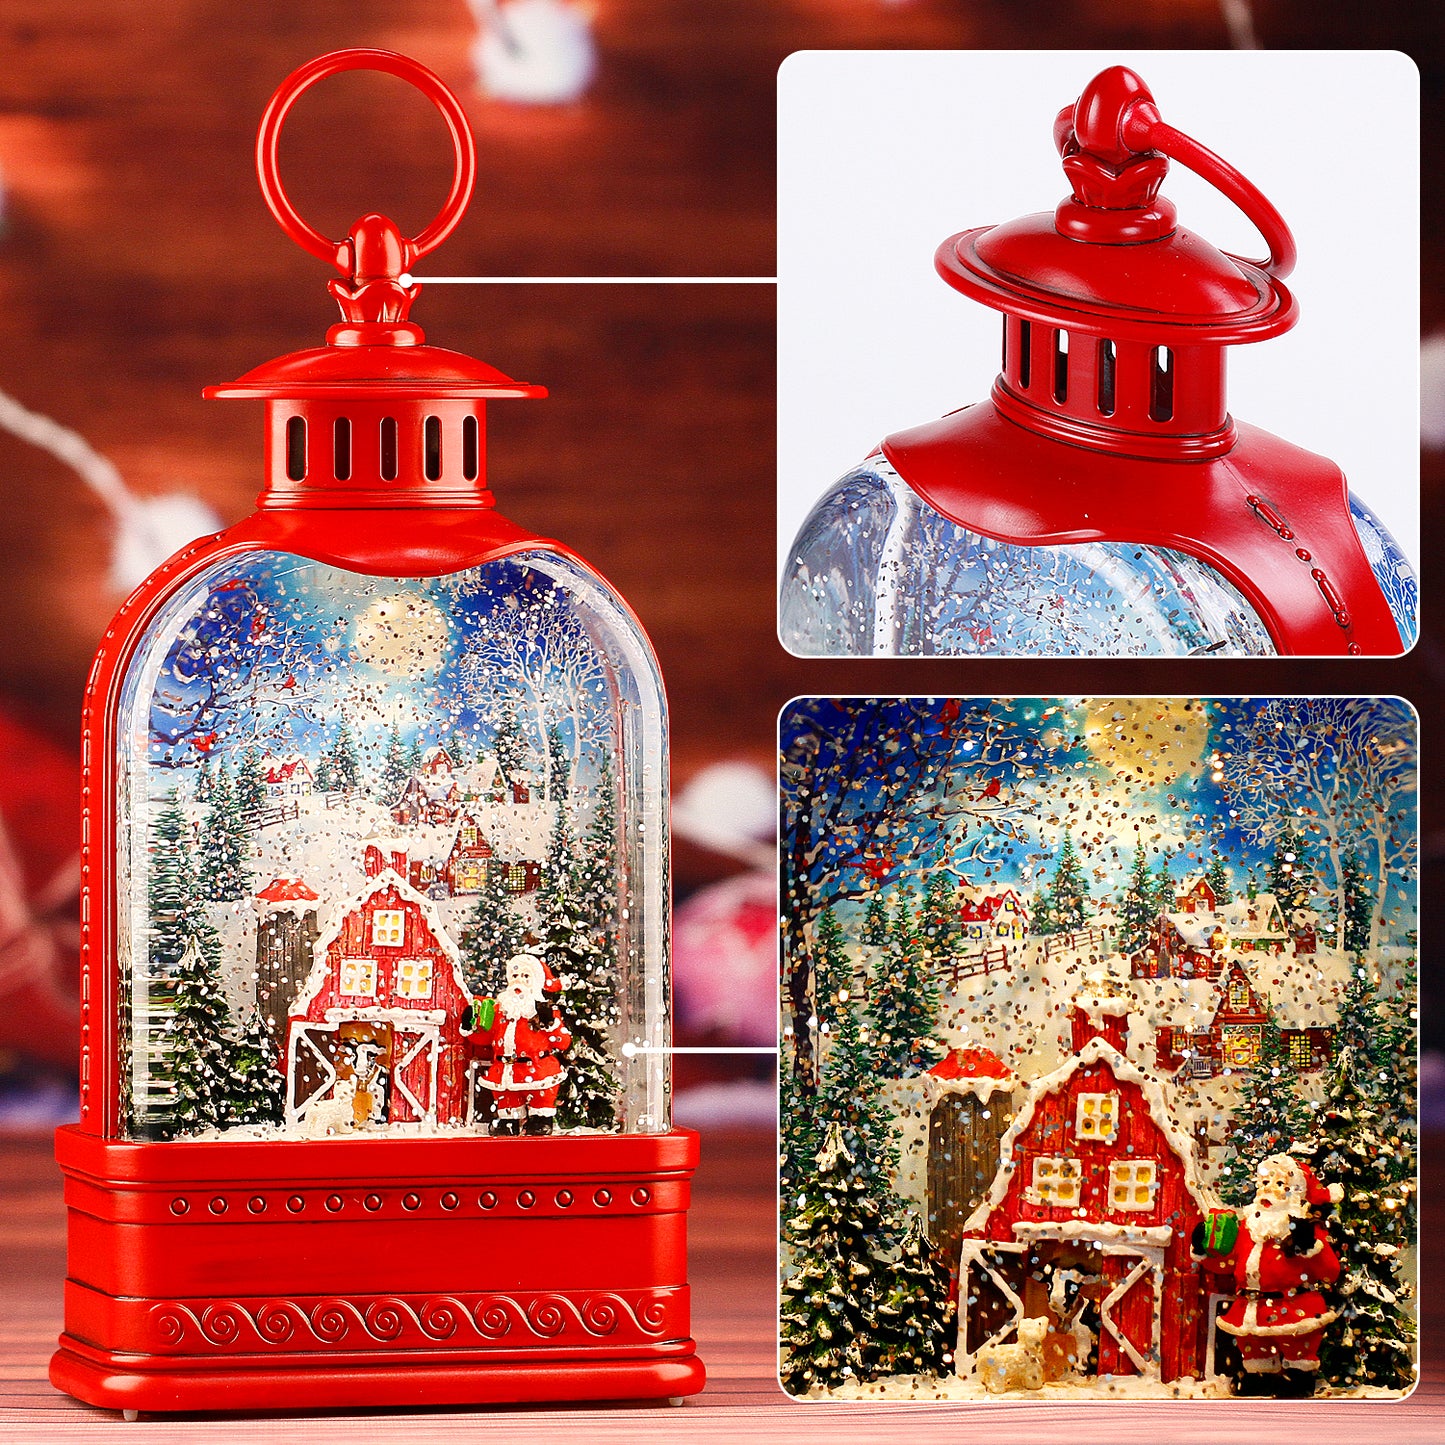 Christmas Decorations,Snow Globe Merry Christmas Gifts with Musical,Water Glittering Lantern Swirling ,Christmas Home Decorations, Christmas Tree and Snowman